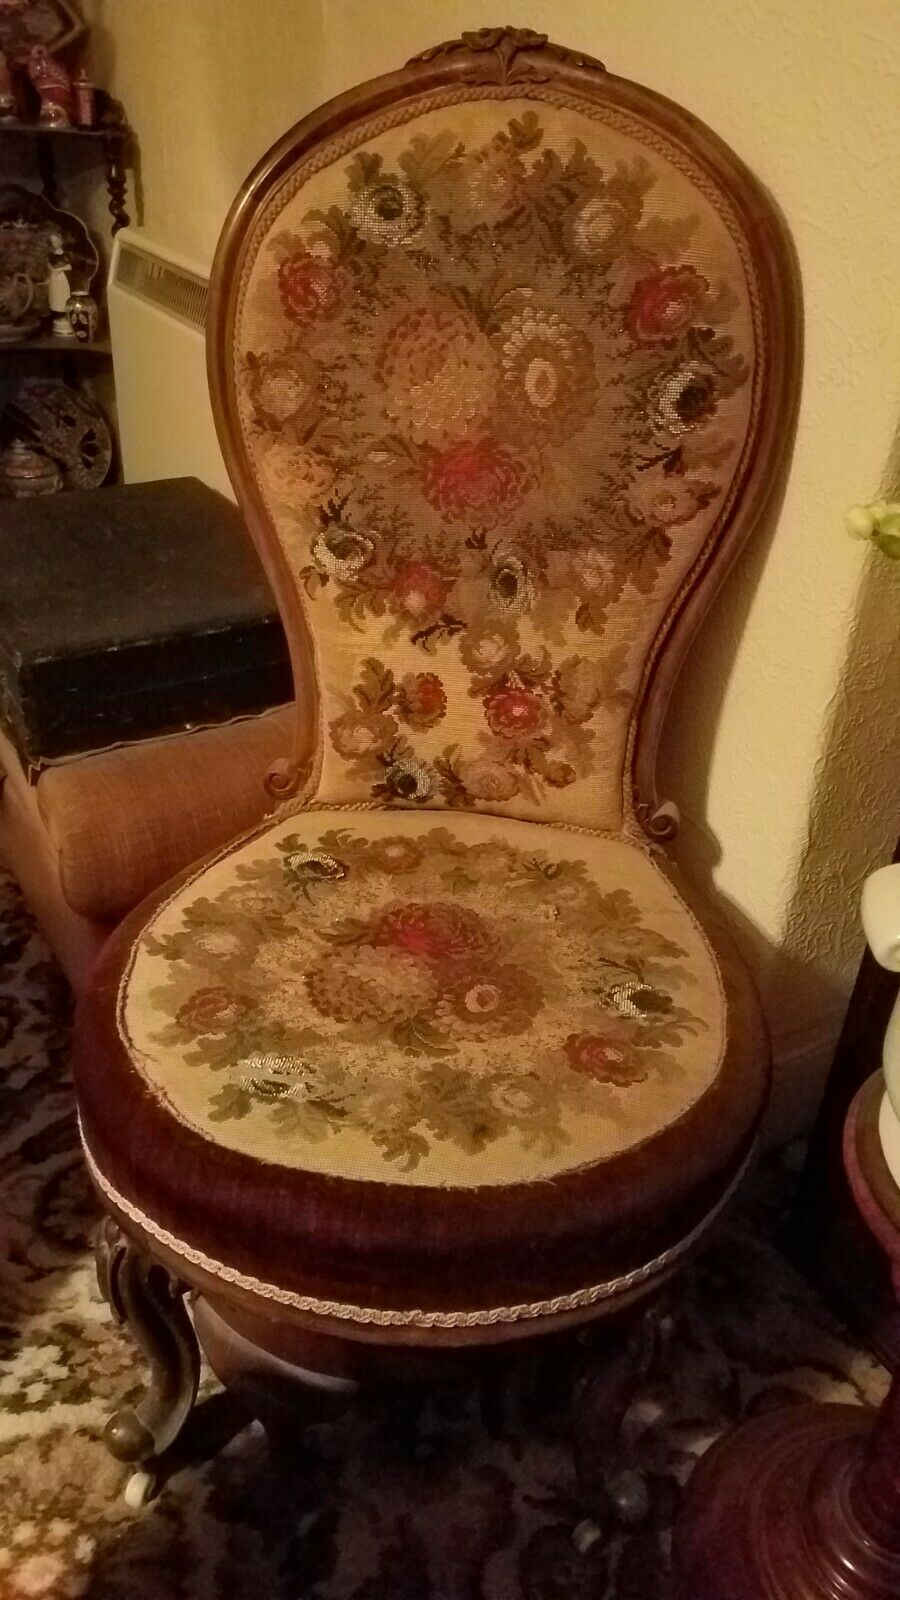 ANTIQUE MAHOGANY NURSING SIDE CHAIR HAND SEWN BEADED TAPESTRY SEAT & BACK